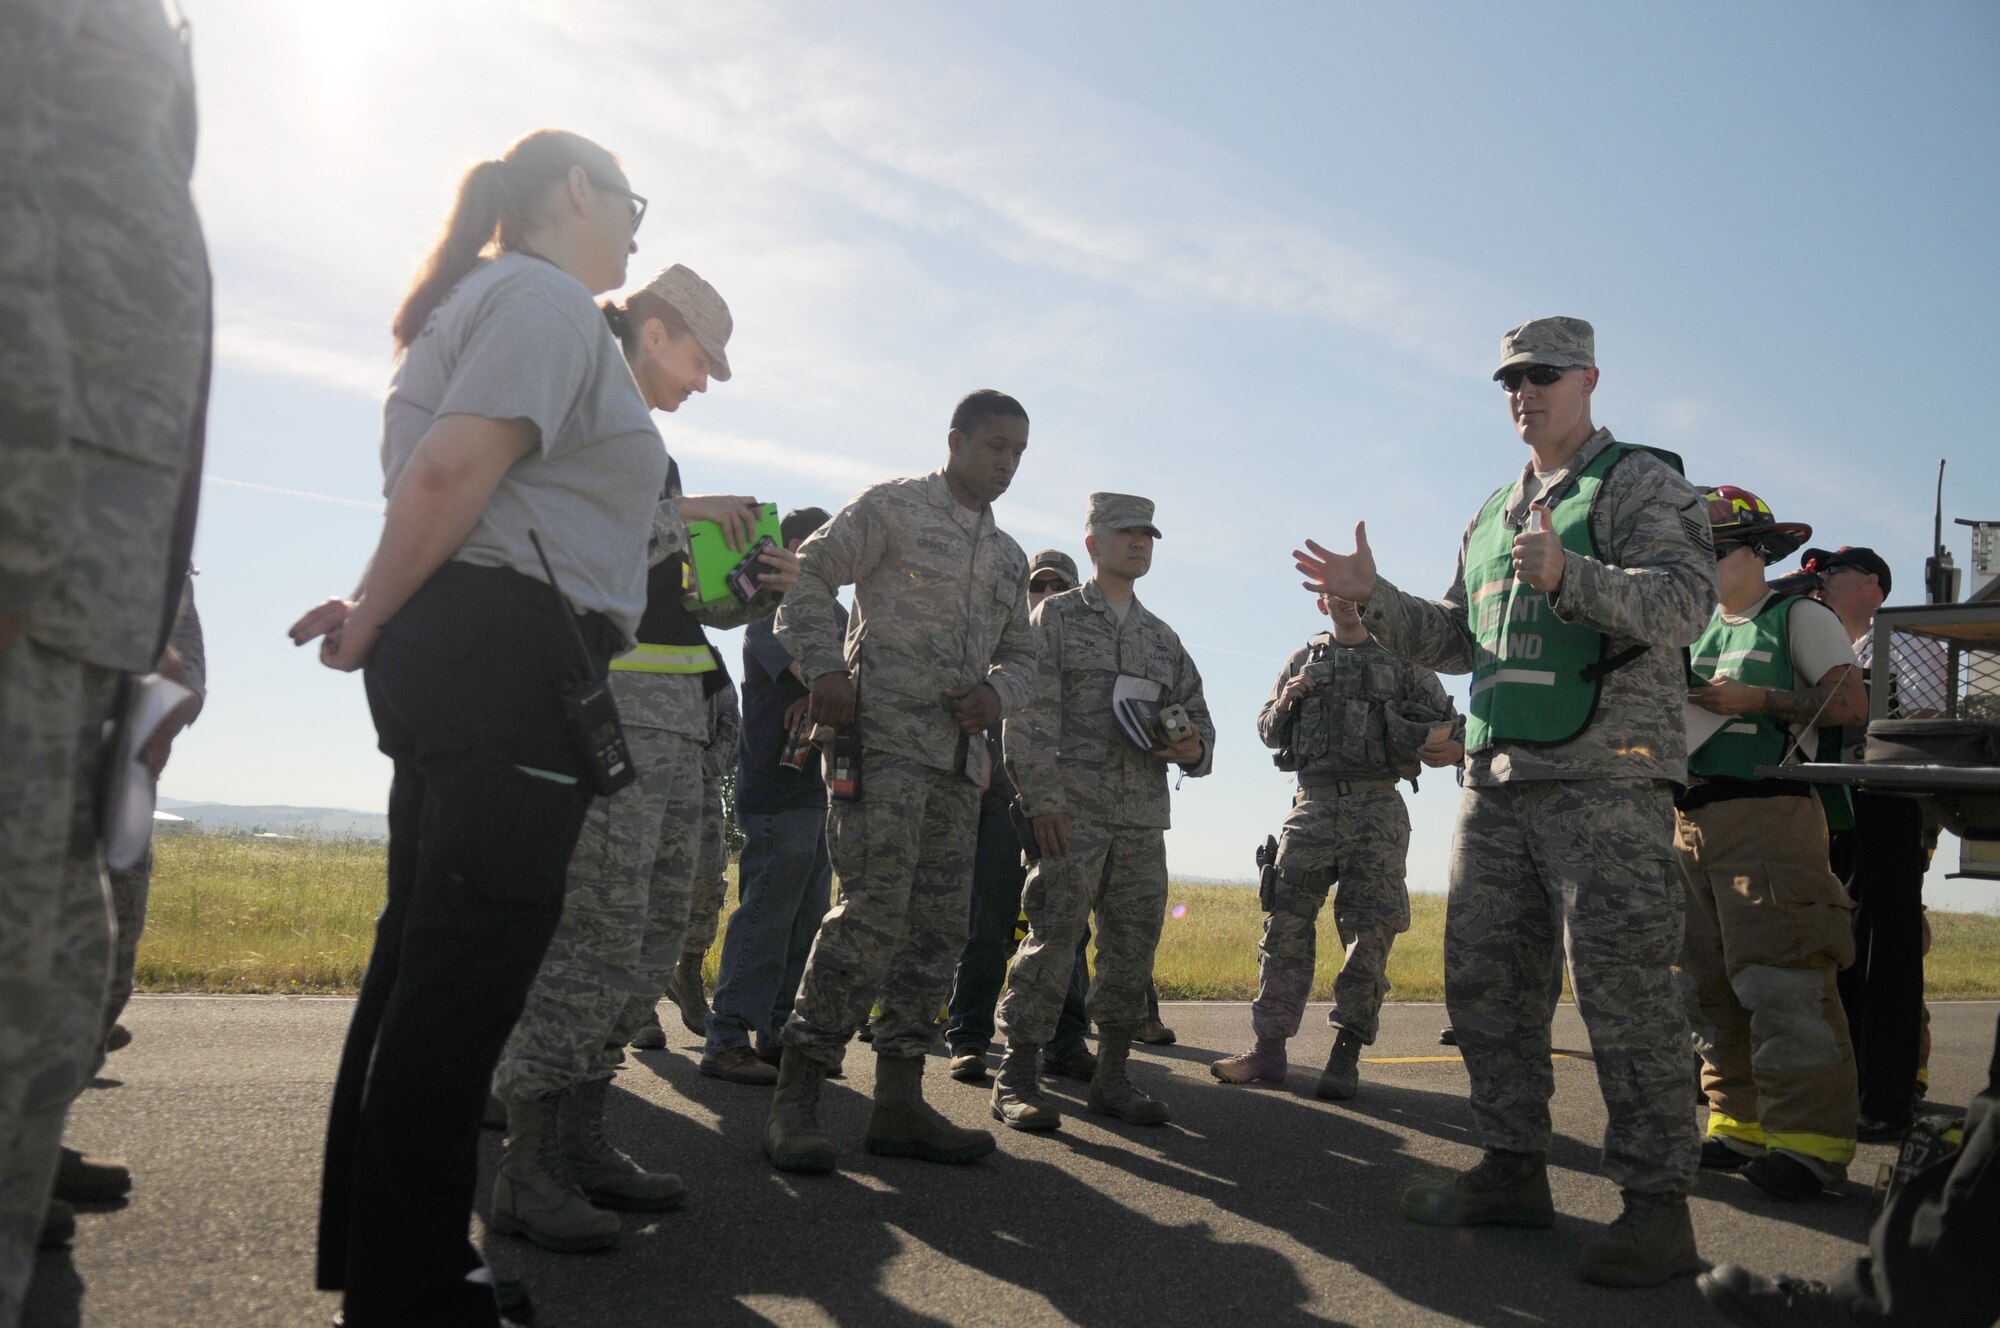 Airman assigned to Beale Air Force Base gather for a brief prior to a fuel spill exercise designed to see how well they respond at Beale AFB, California May 4, 2017. Exercises are designed and implemented by wing inspector generals, ensuring that Airmen are proficient in the skills needed for that scenario. (U.S. Air Force photo by Airman 1st Class Douglas Lorance)